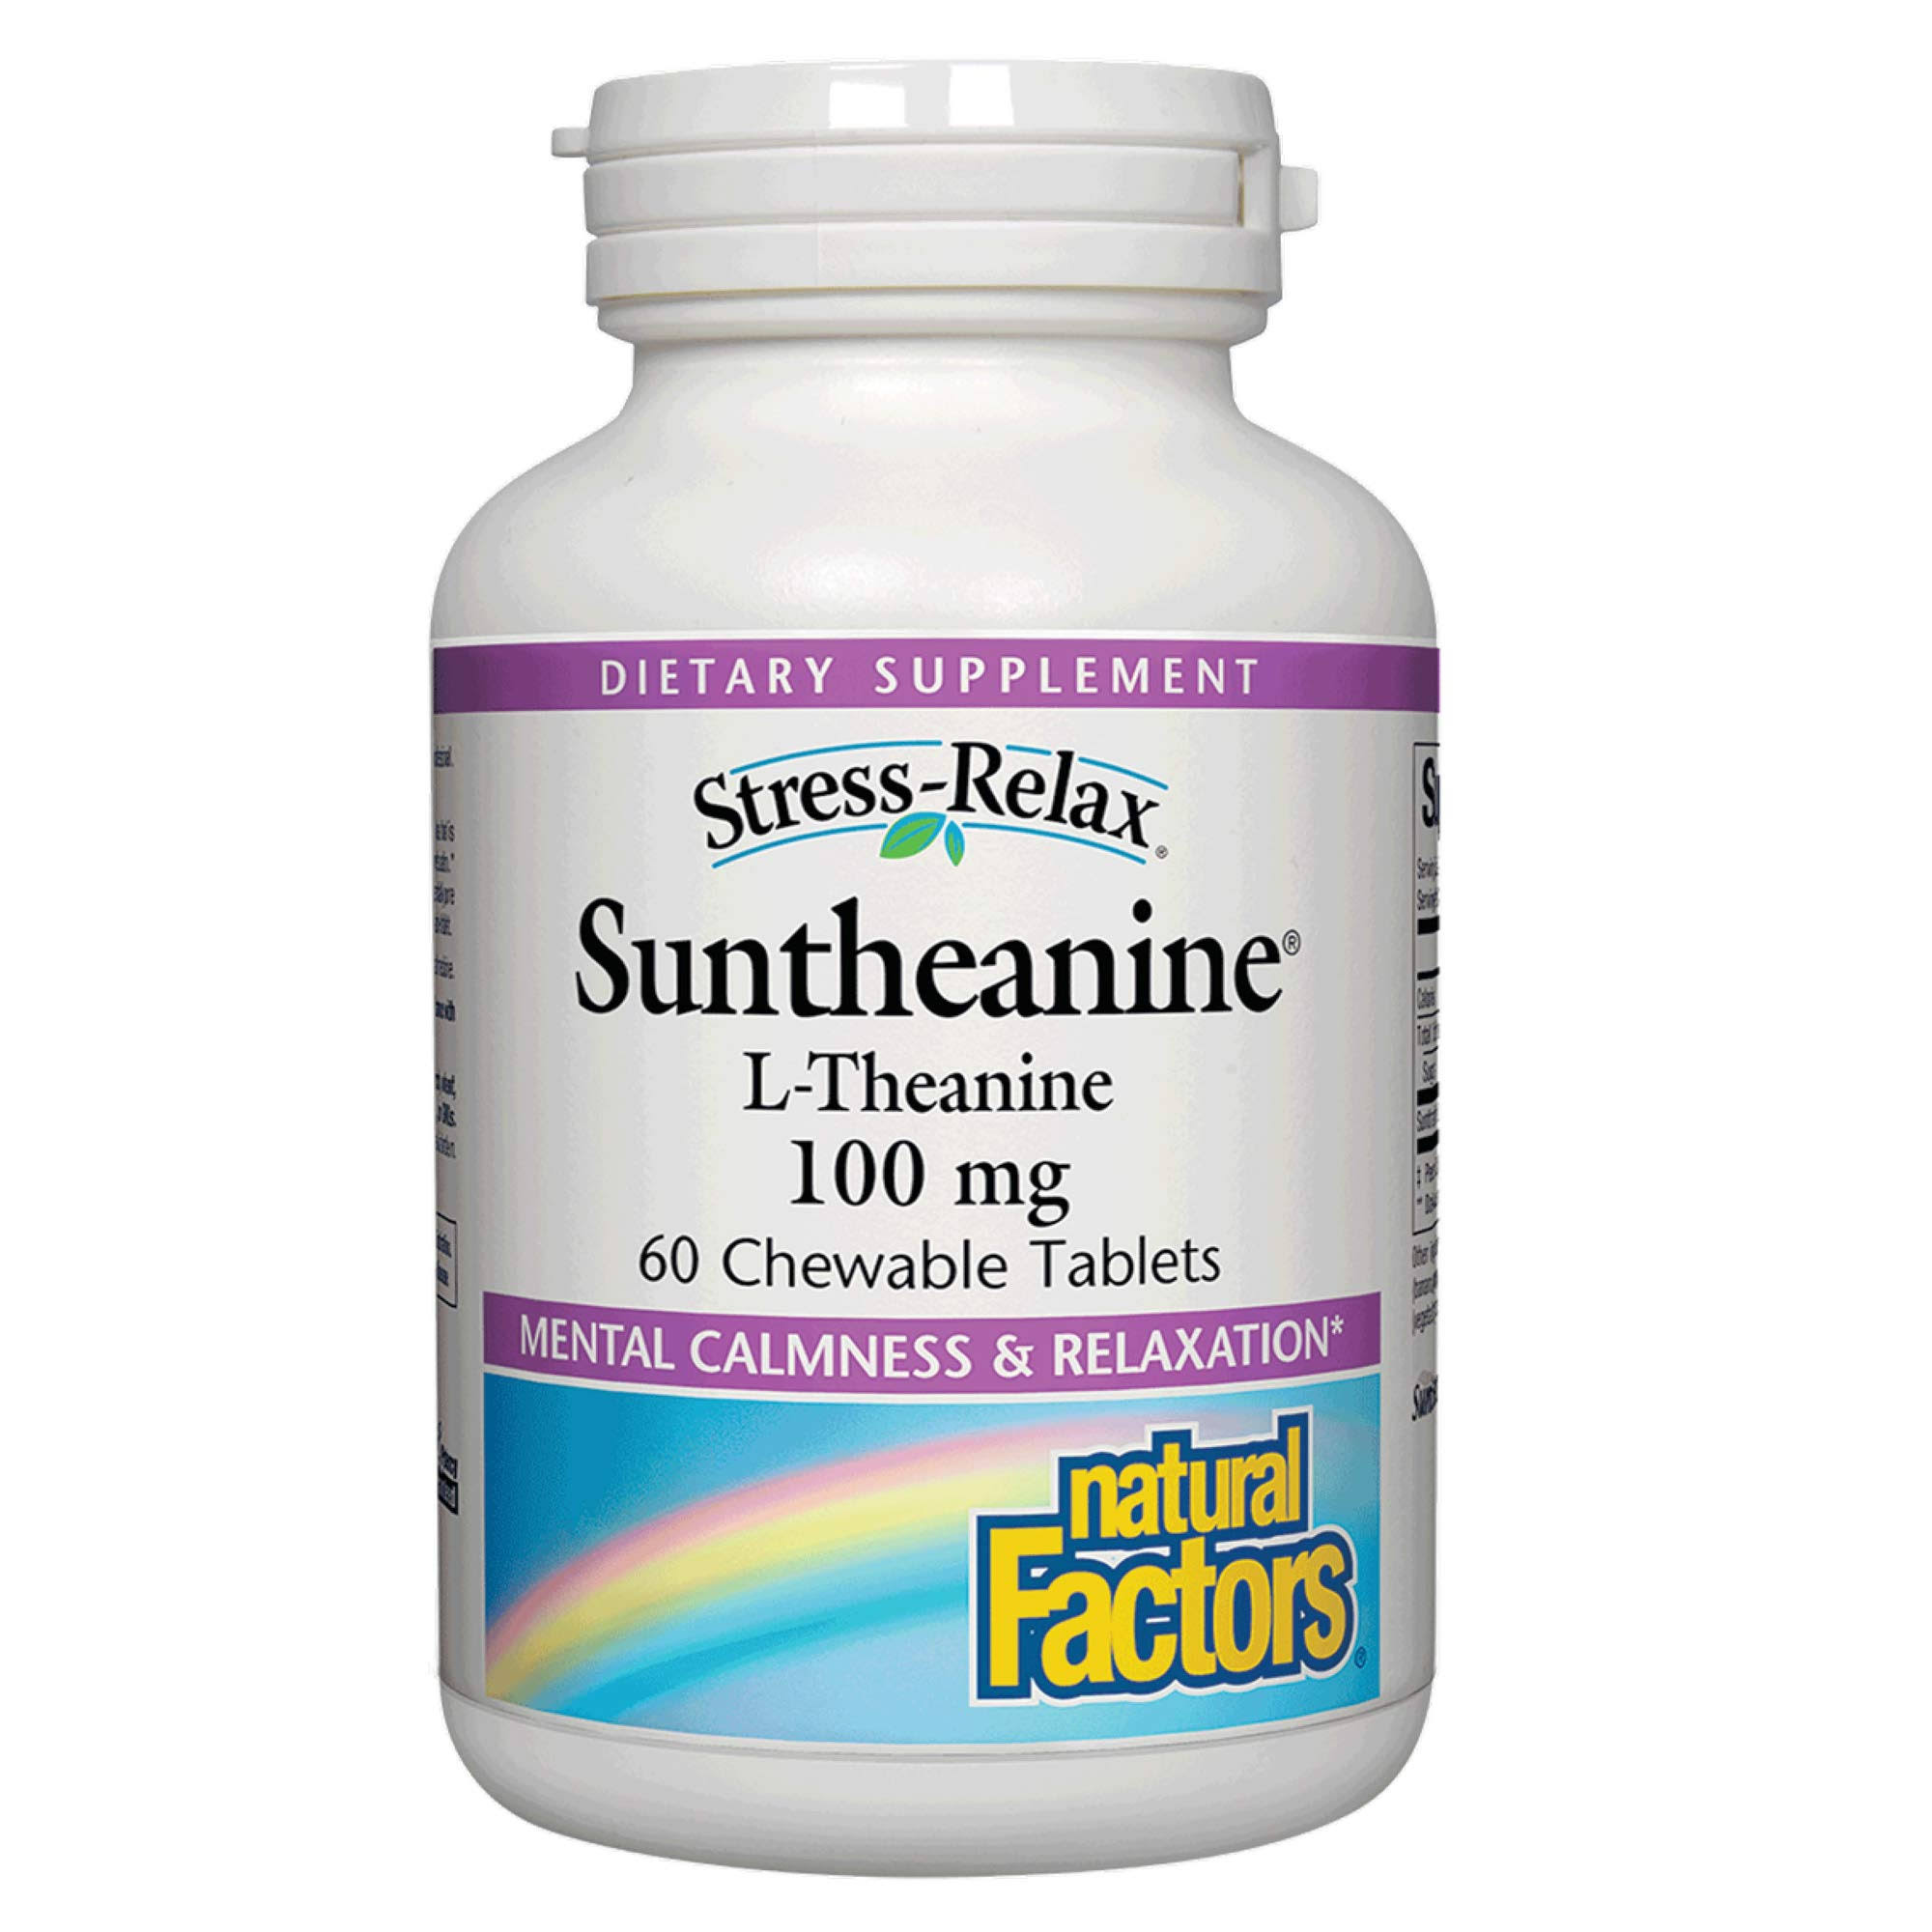 Natural Factors Stress-Relax - Suntheanine L-Theanine, 60 Chewable Tablets